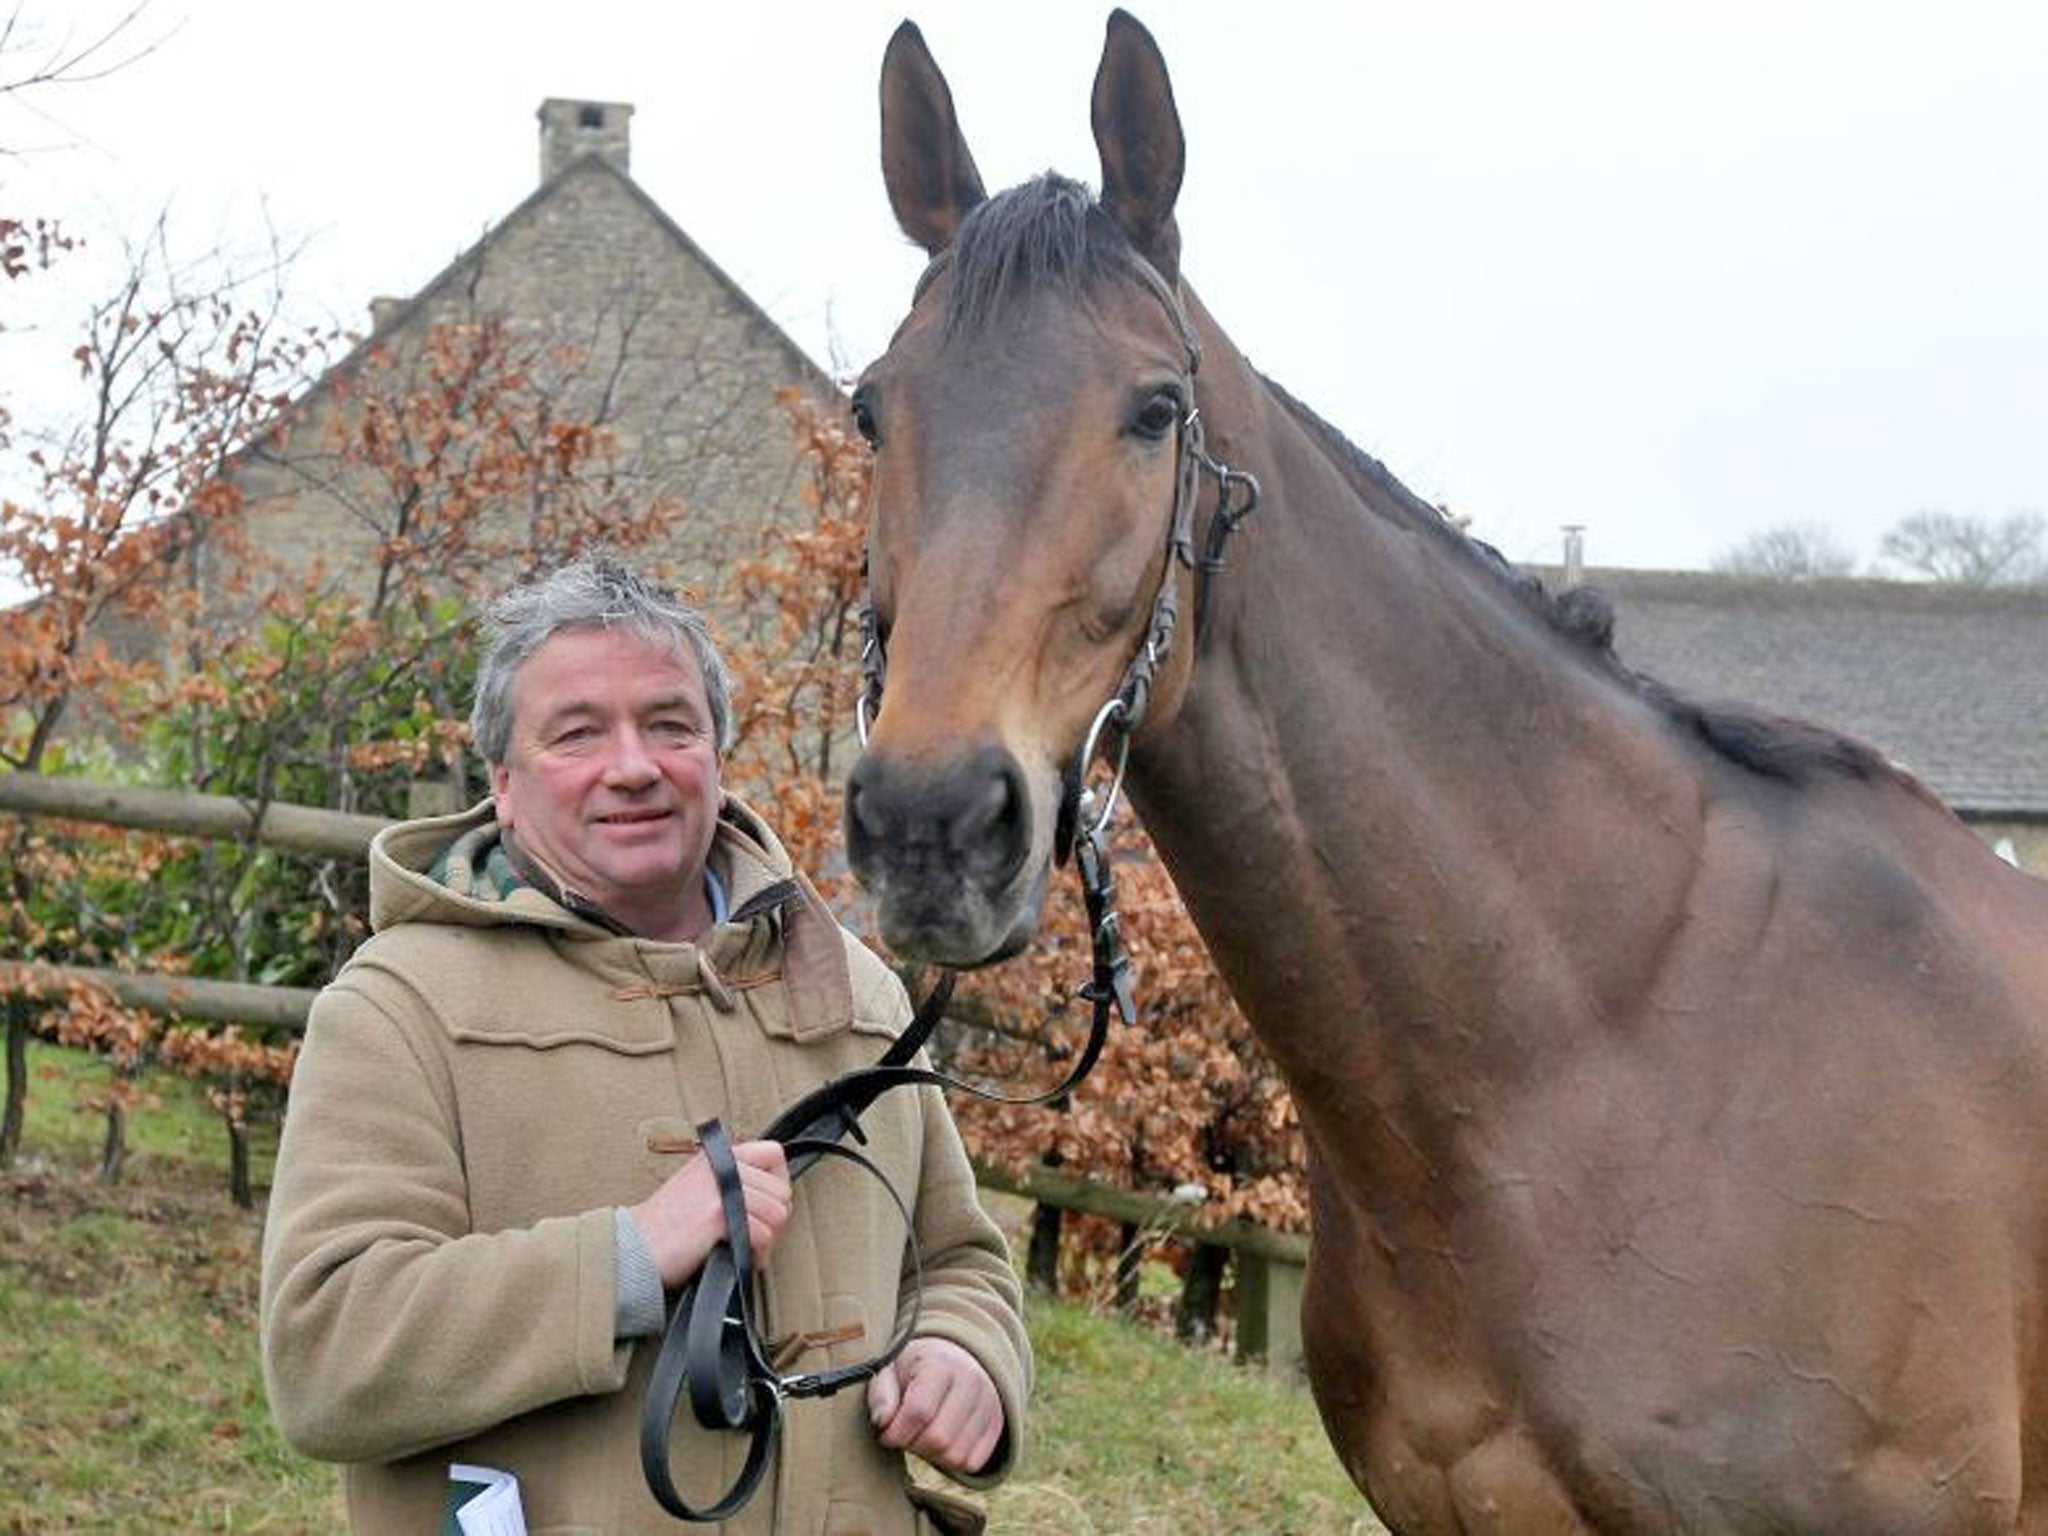 Trainer Nigel Twiston-Davies and Imperial Commander at Grange
Hill Farm yesterday